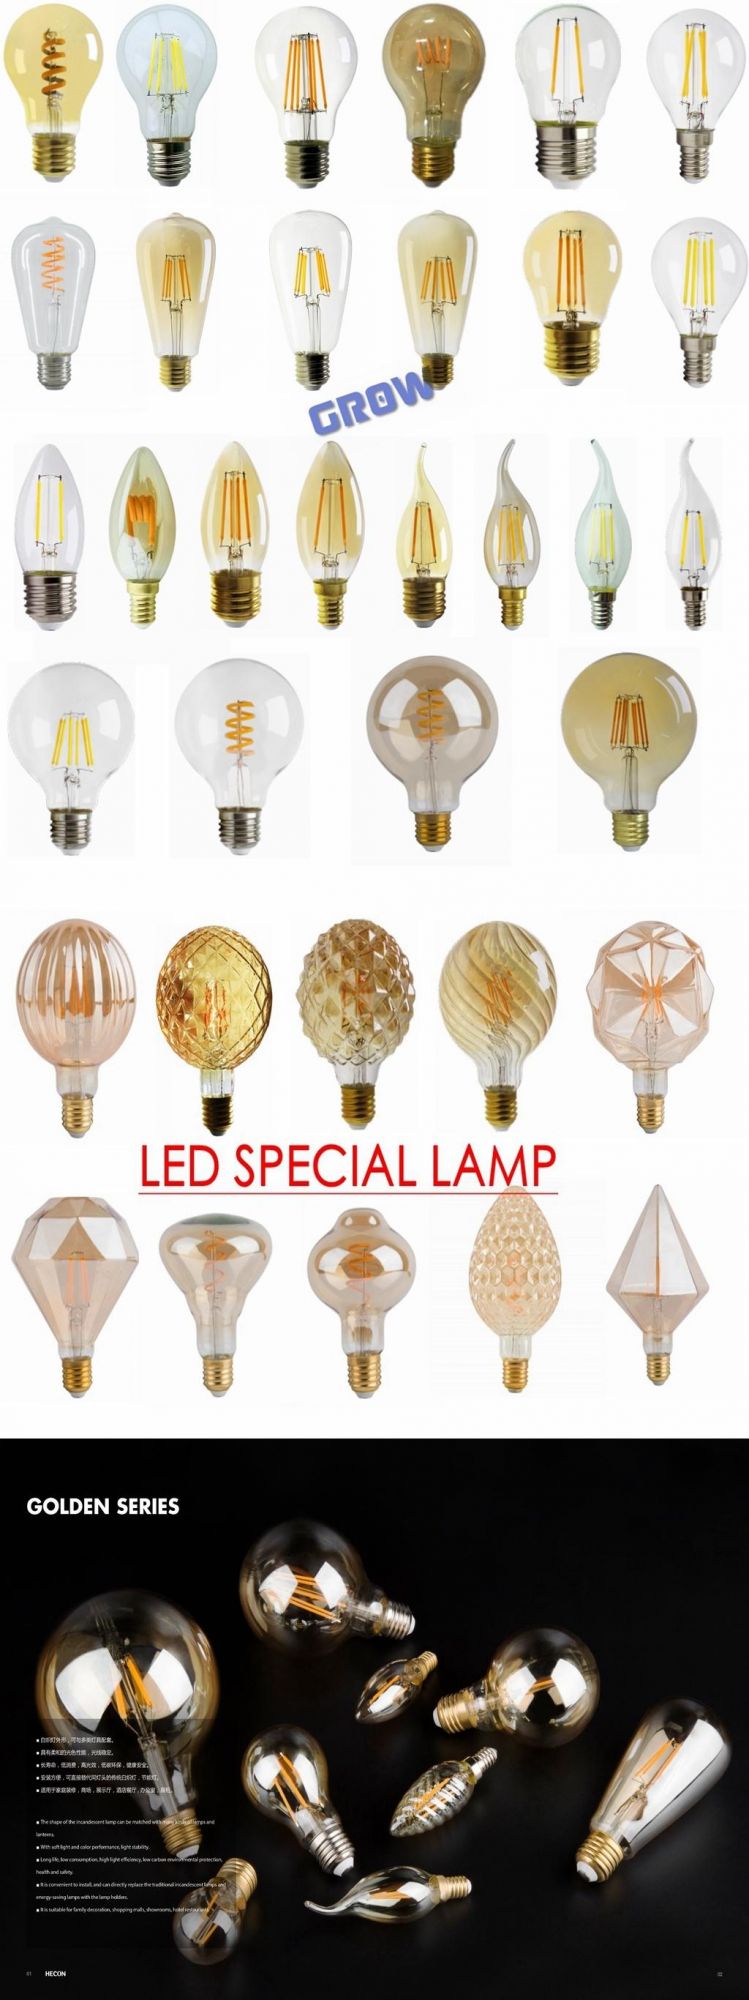 LED Filament Lamp A60 LED Filament Bulb 6W Amber E27/B22 ODM OEM Chinese Fctory Price with CE Certified